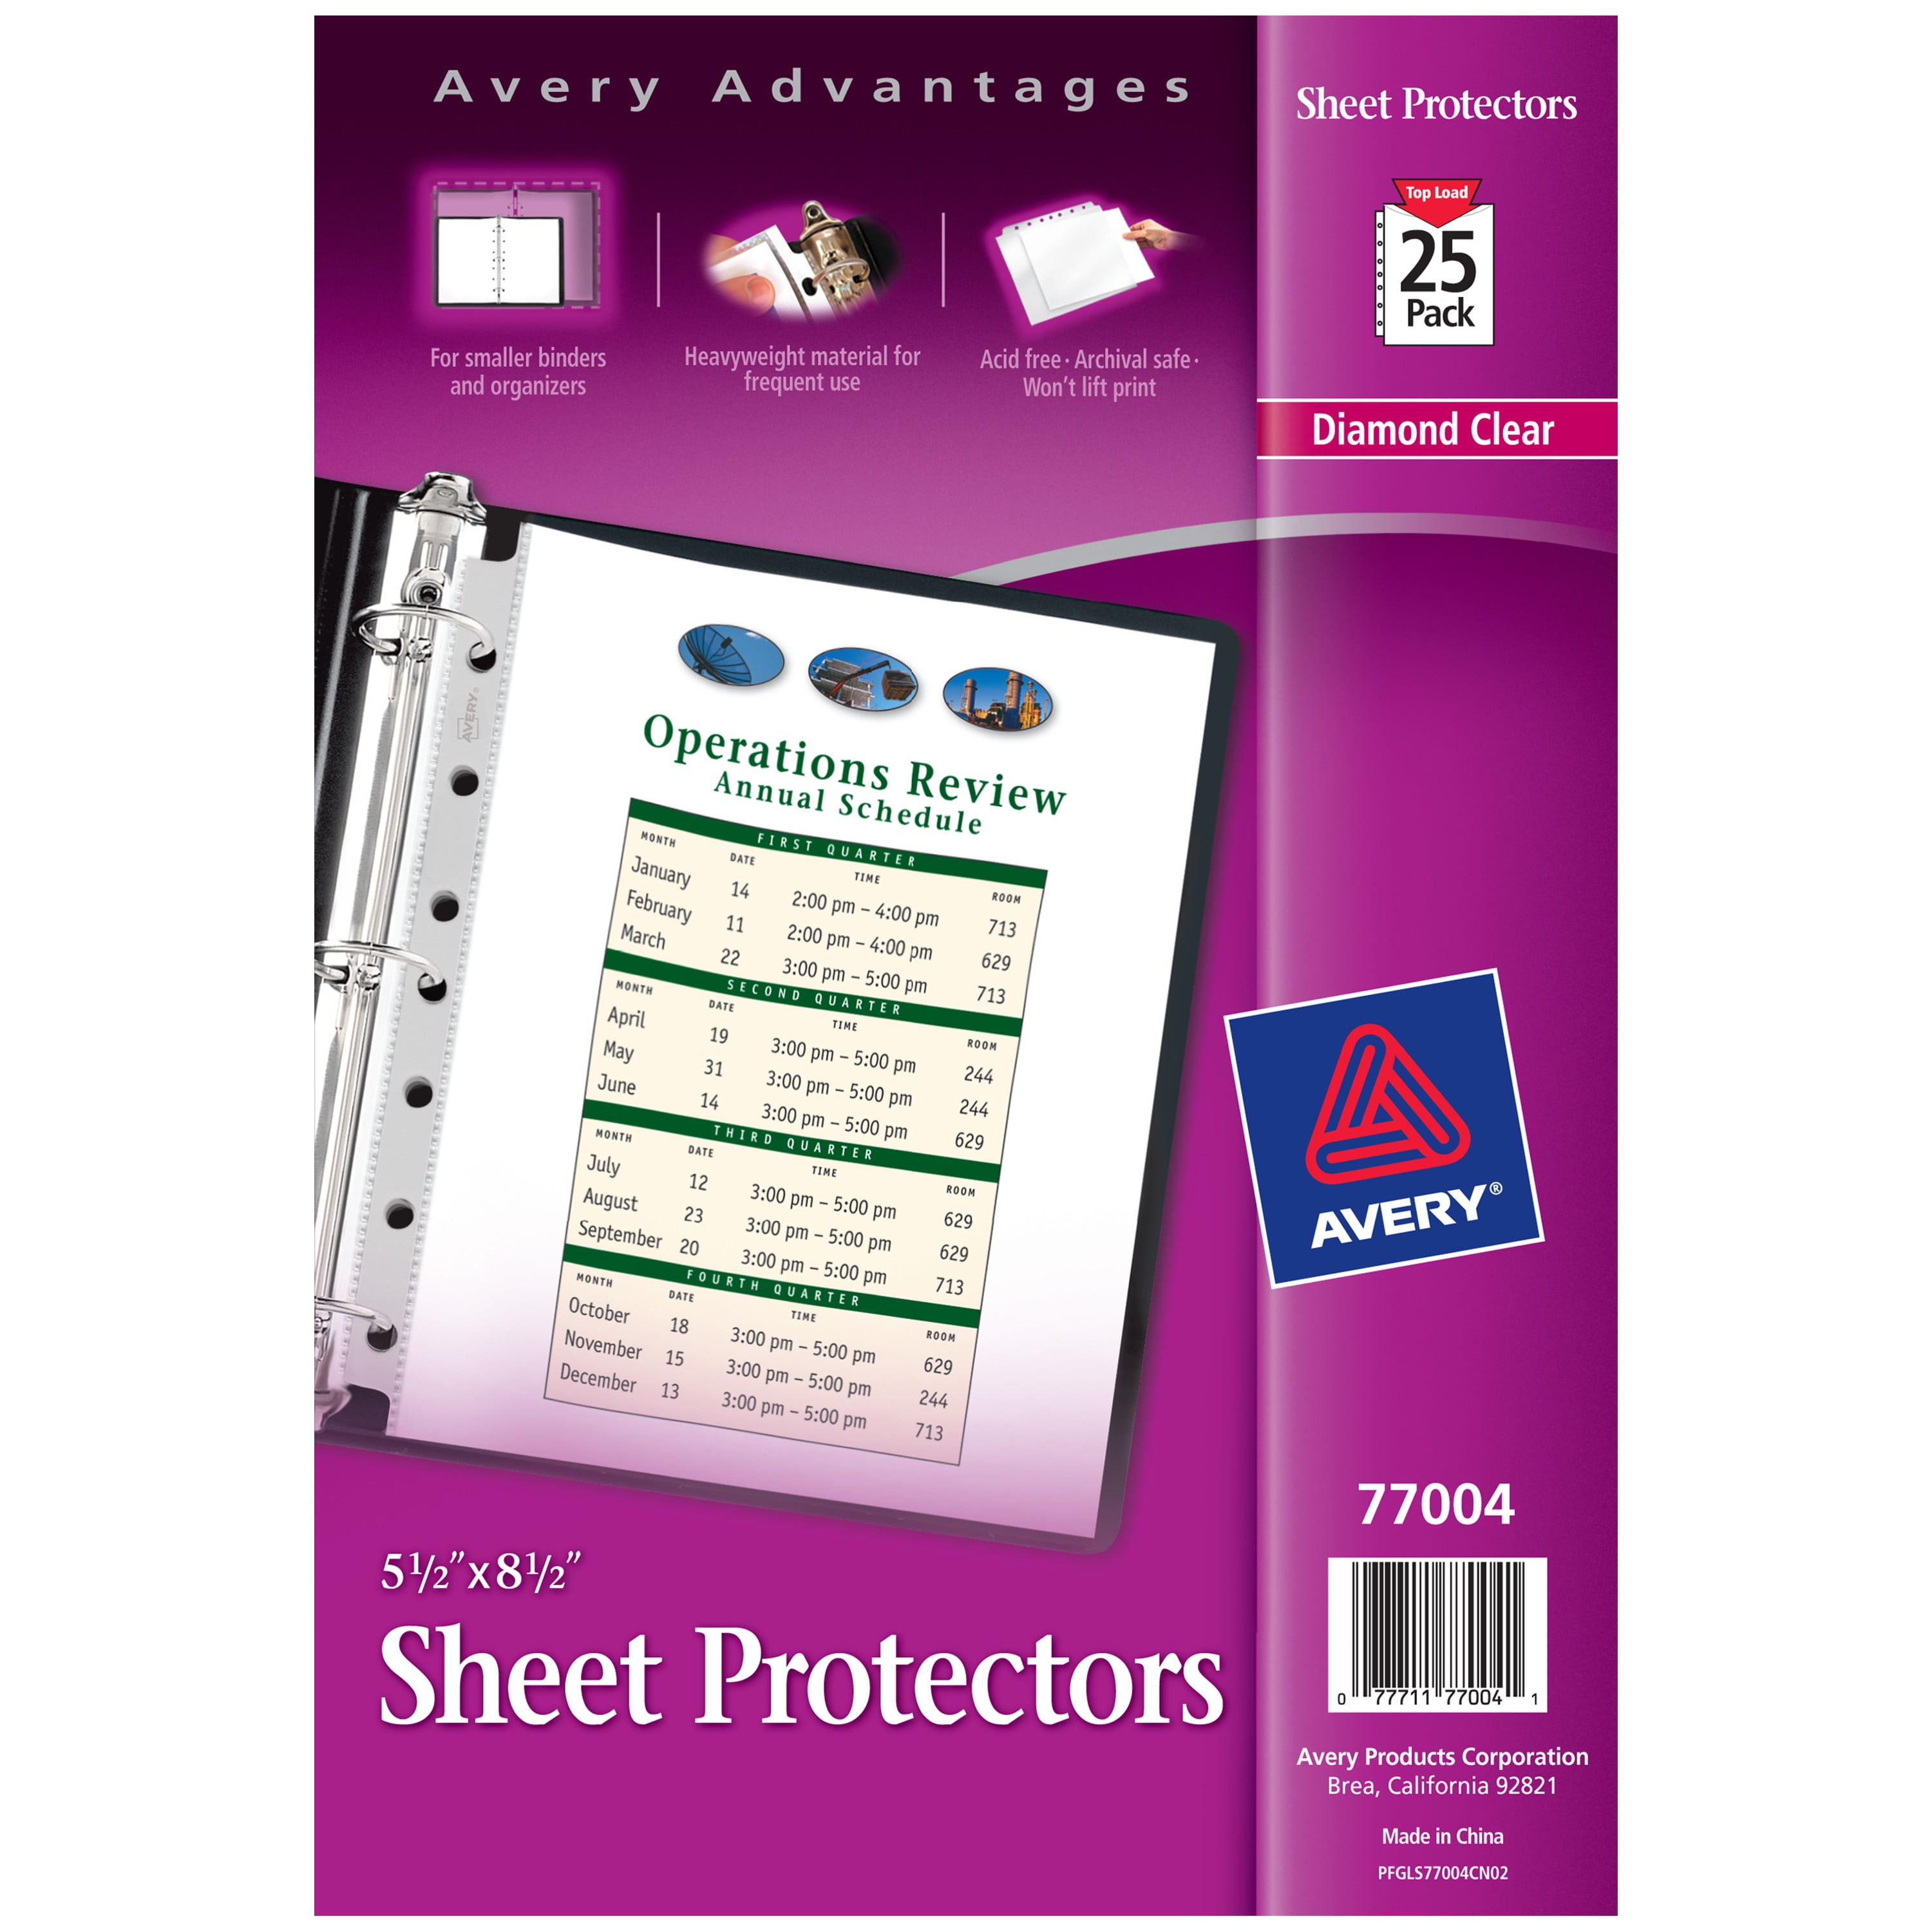 Pacon Heavy duty Anchor Chart Paper 27 x 34 White 25 Sheets Per